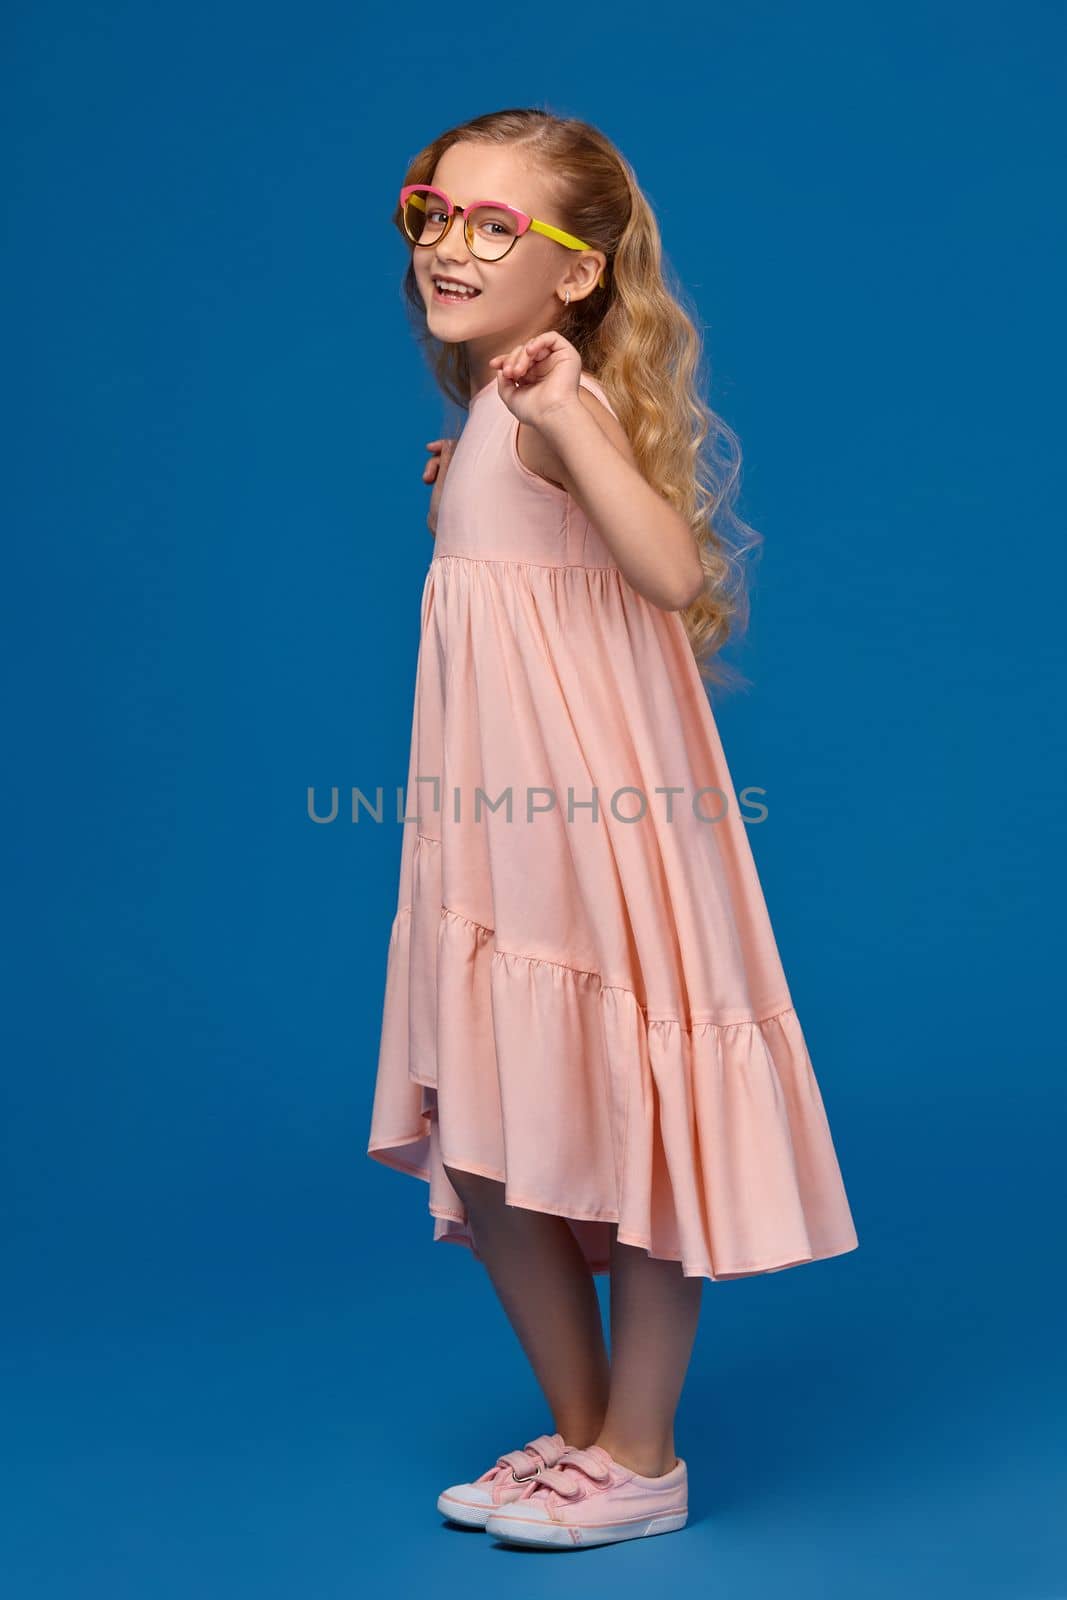 beautiful little girl in a pink dress, fashionable glasses and a pink sneakers is dancing, on a blue background.